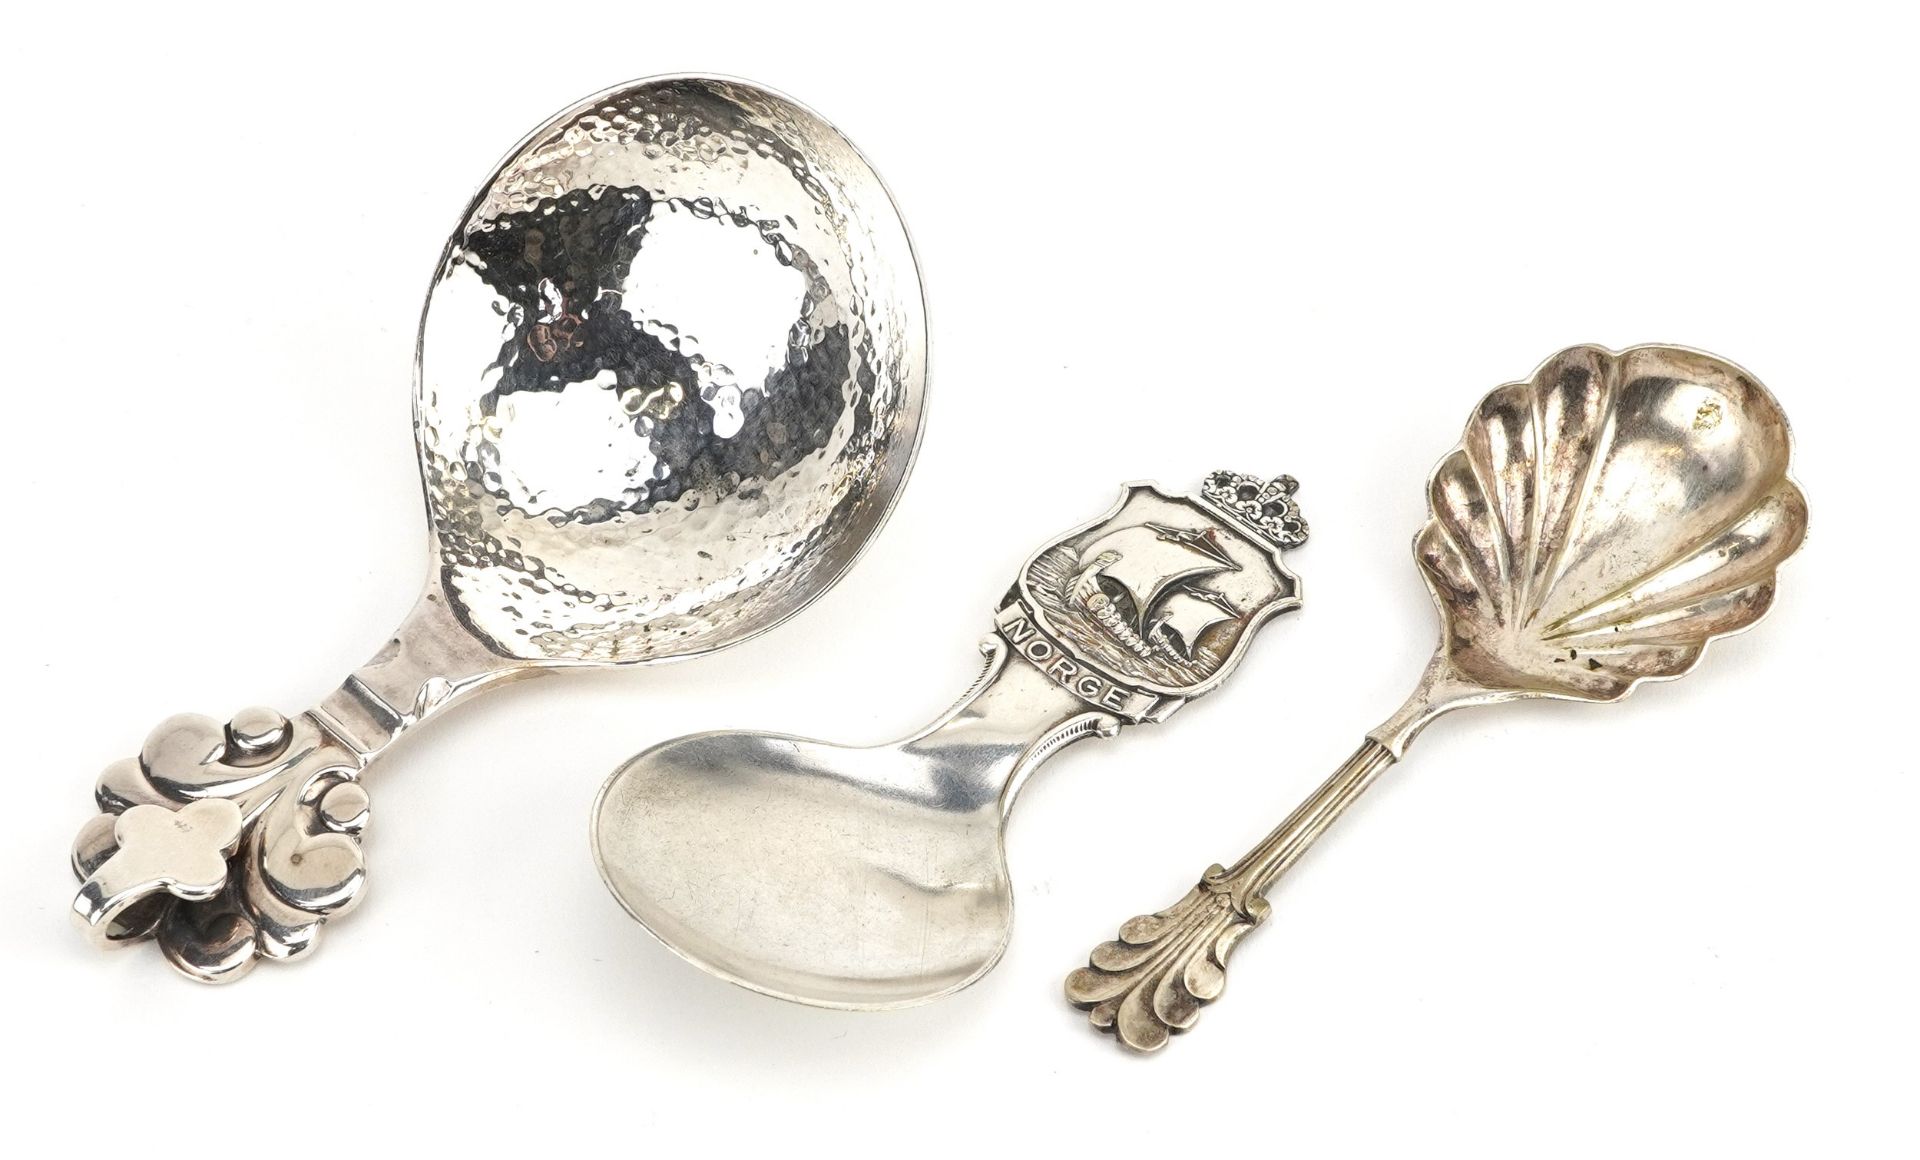 Three decorative arts caddy spoons including one with planished bowl in the style of Georg Jensen,